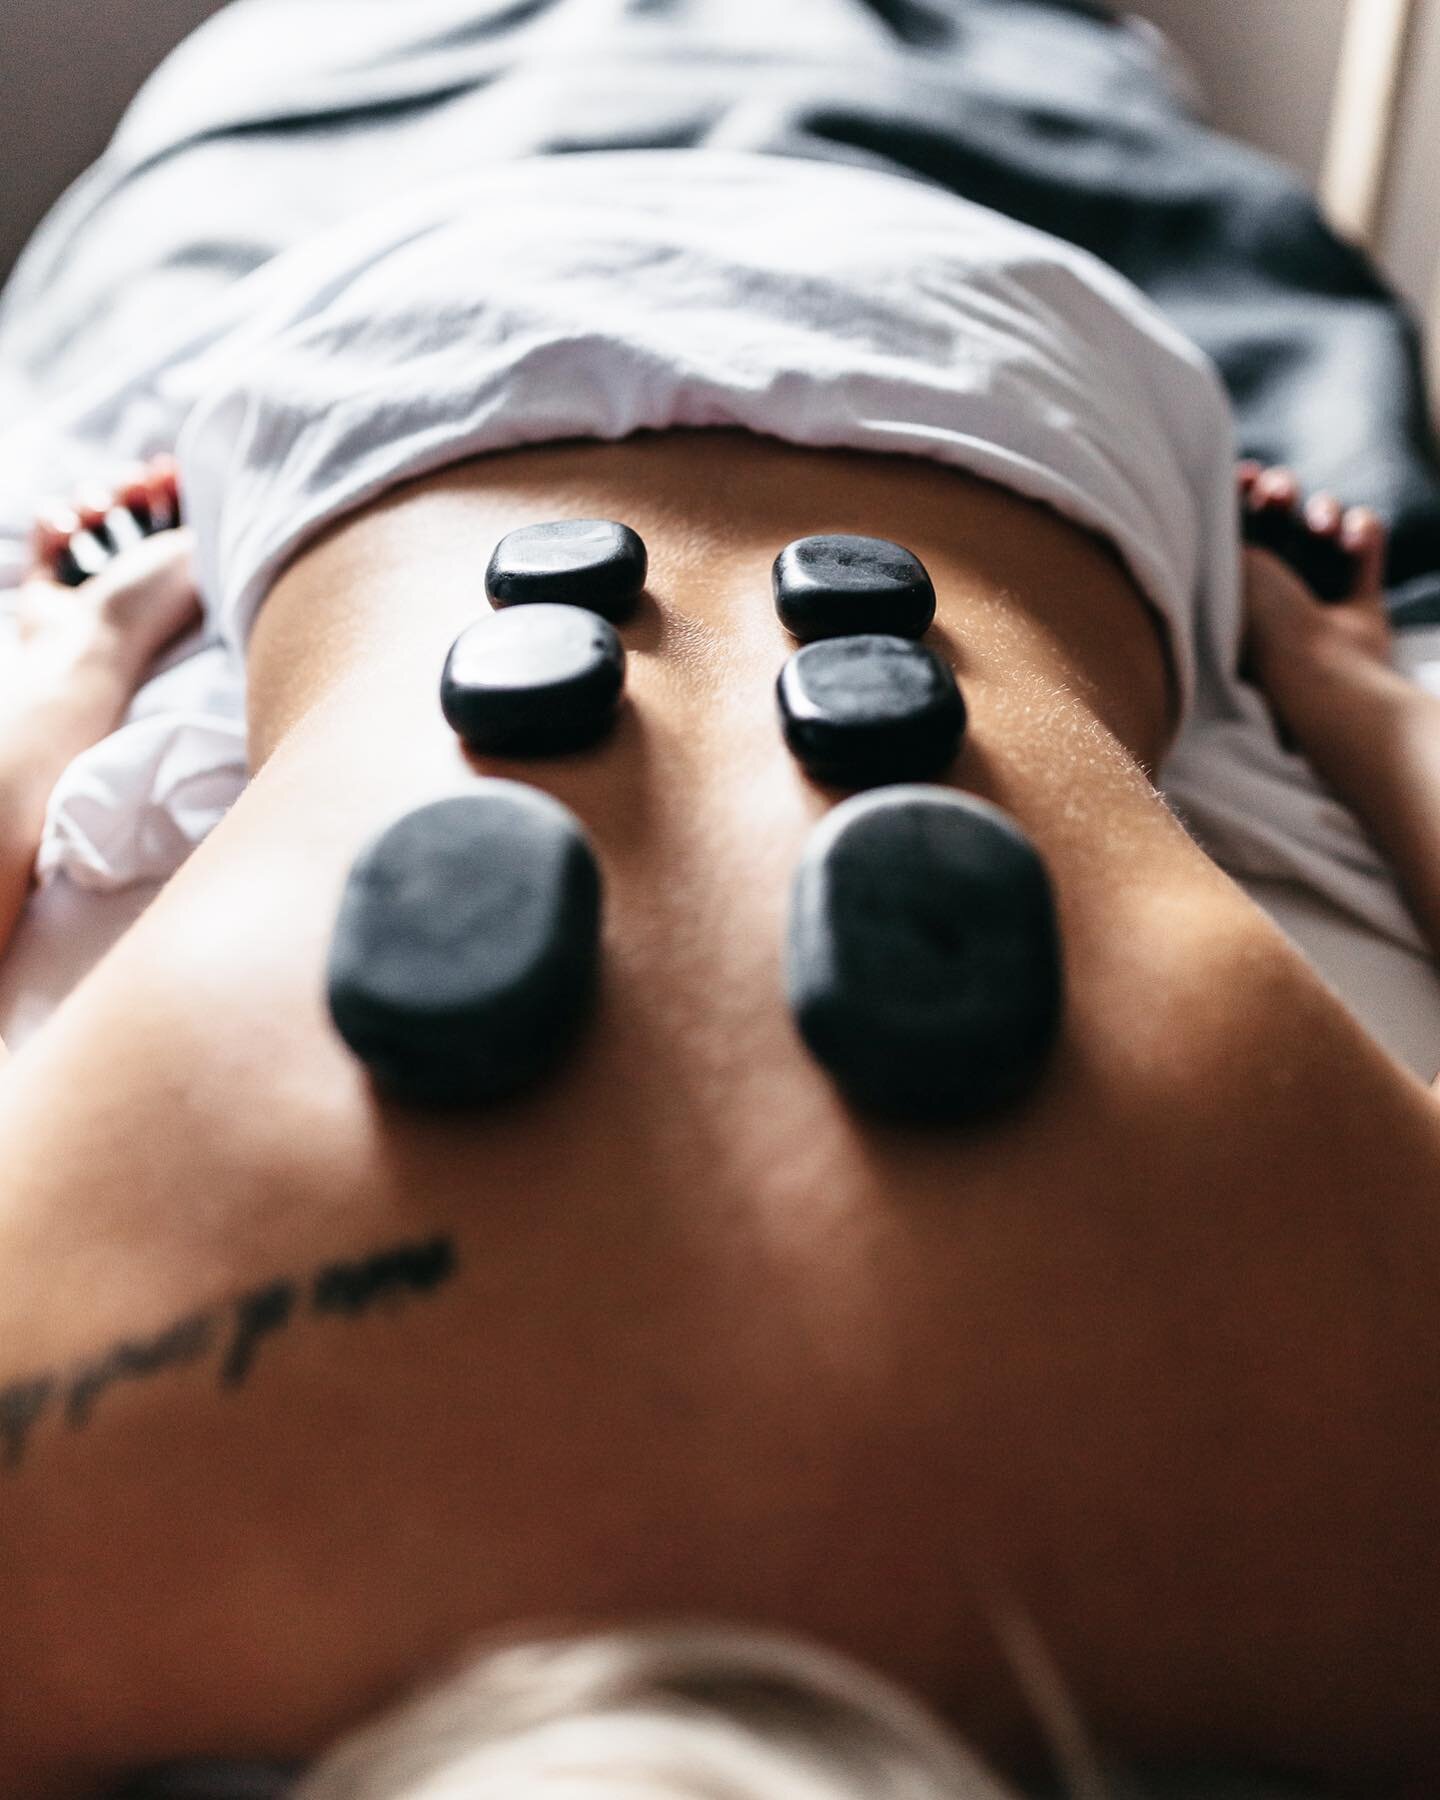 We hope your weekend feels as peaceful as this. 
Who would like to see Hot Stone Therapy back at Body Waves? Comment below!
.
.
.
#massage #massagetherapy #registeredmassagetherapy #winnipegmassagetherapy #massage #cuppingtherapy #cupping #therapy #m